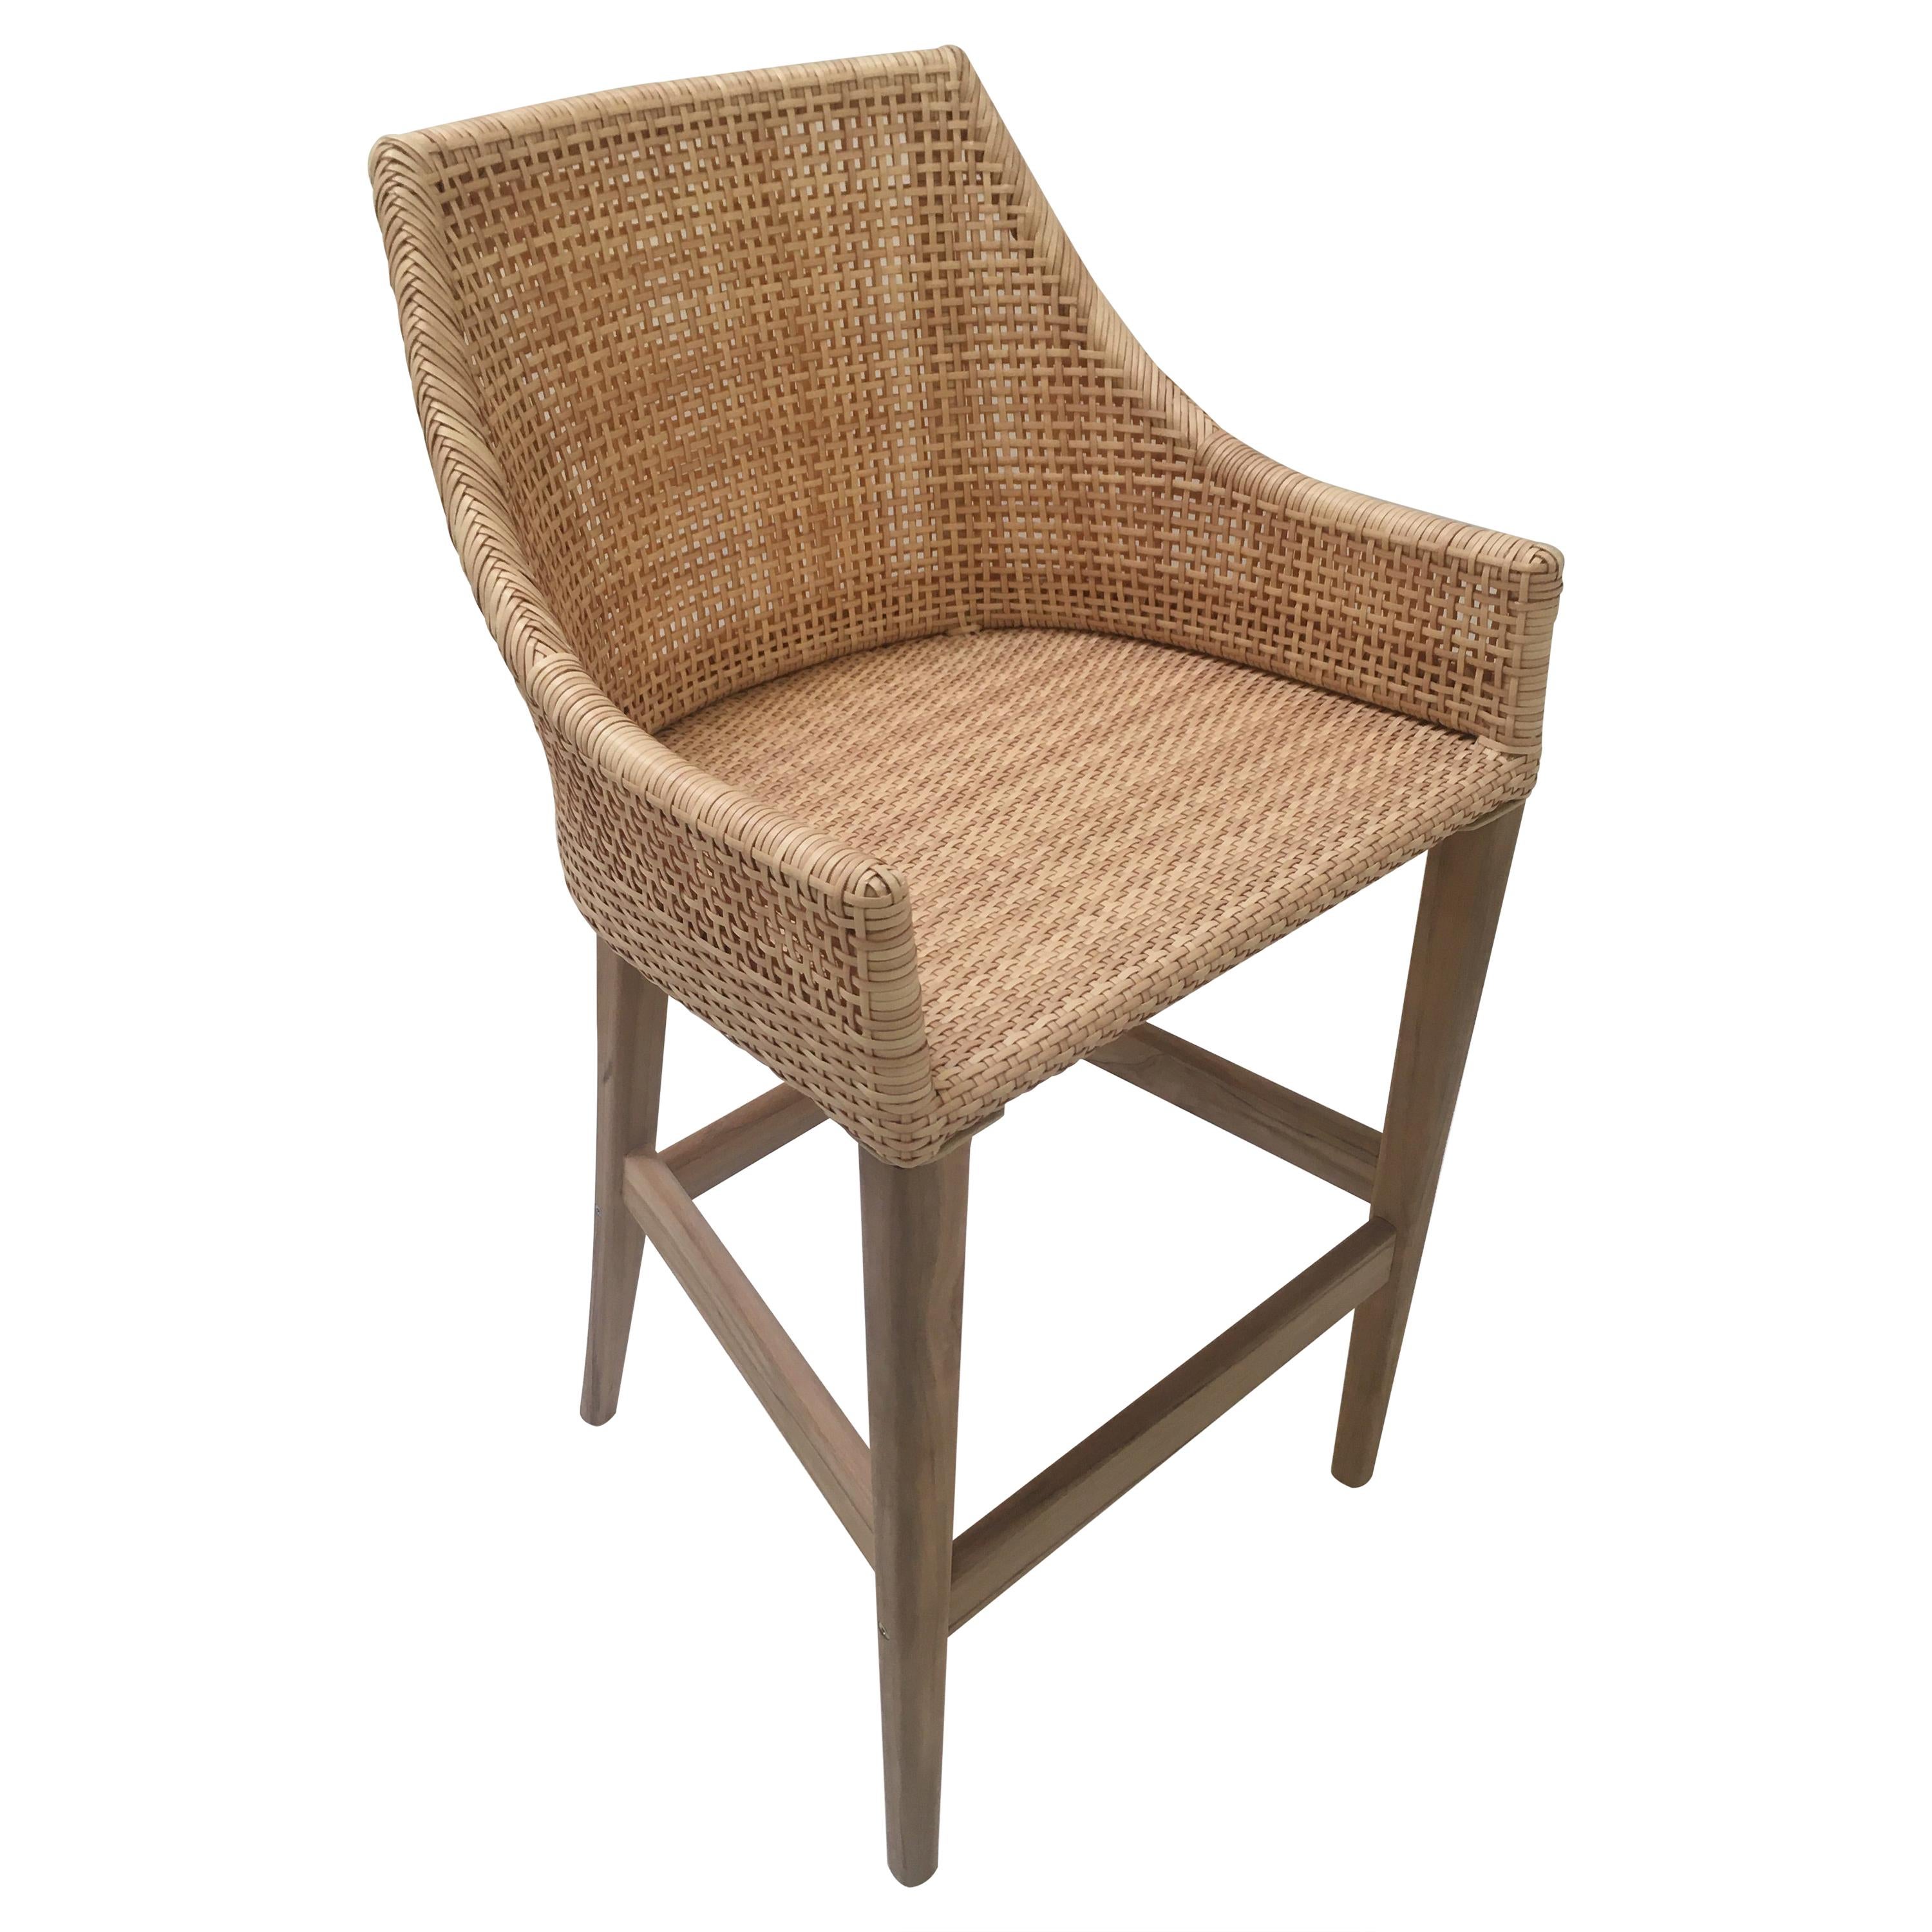 Teak Wooden and Braided Resin Rattan Effect Outdoor Bar Stool For Sale